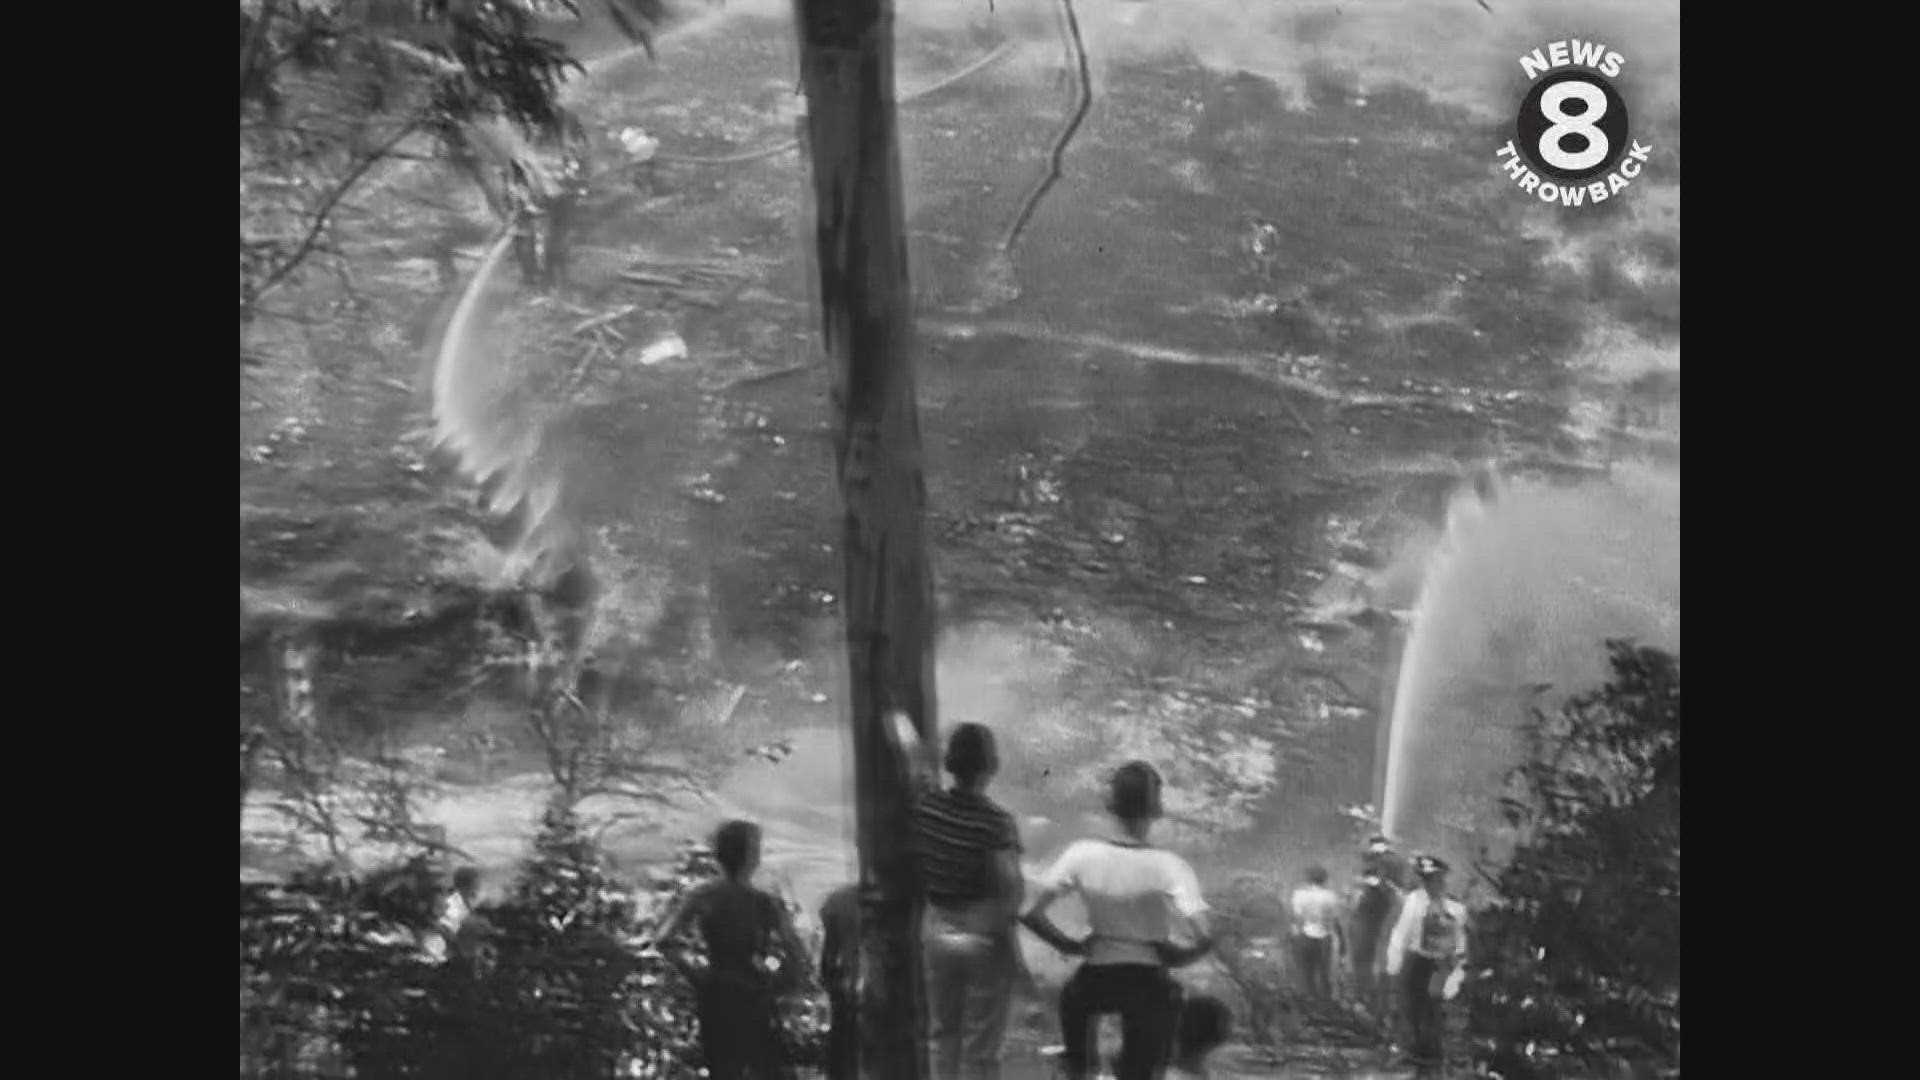 Mission Hills Canyon fire in the 1950s.